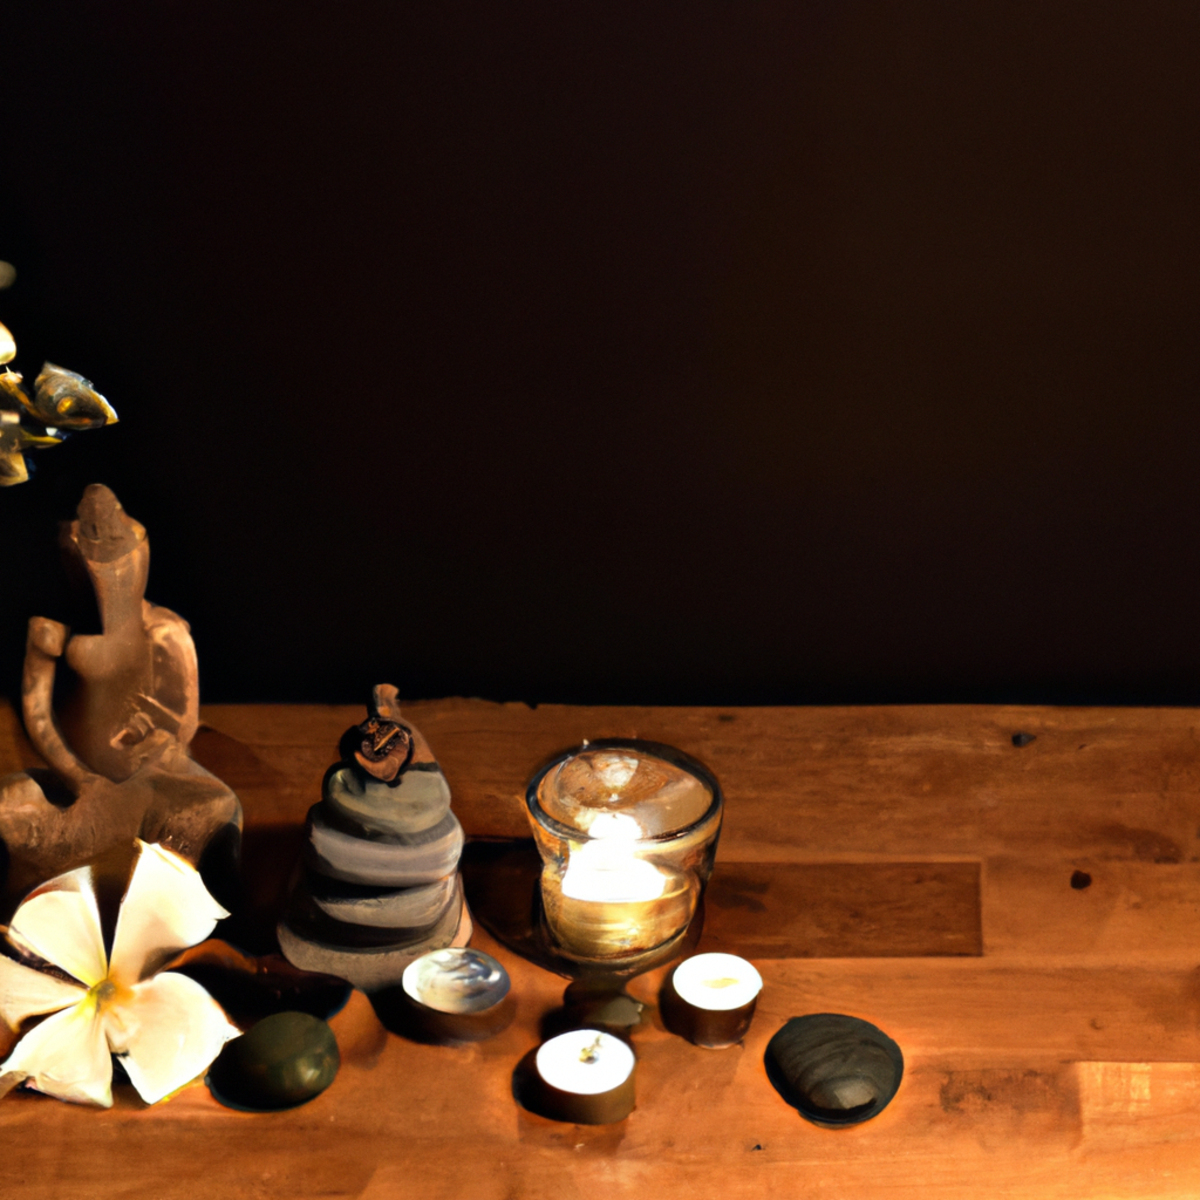 The photo features a serene scene of a wooden table with various objects arranged in a thoughtful manner. In the center of the table, there is a small Buddha statue, surrounded by a few smooth stones and a small vase of fresh flowers. To the left of the statue, there is a lit candle, casting a warm glow over the scene. On the right side of the table, there is a small notebook and pen, inviting the viewer to take notes or reflect on their own meditation practice. The overall effect is one of calm and peacefulness, inviting the viewer to take a moment to cultivate compassion and kindness in their own life.